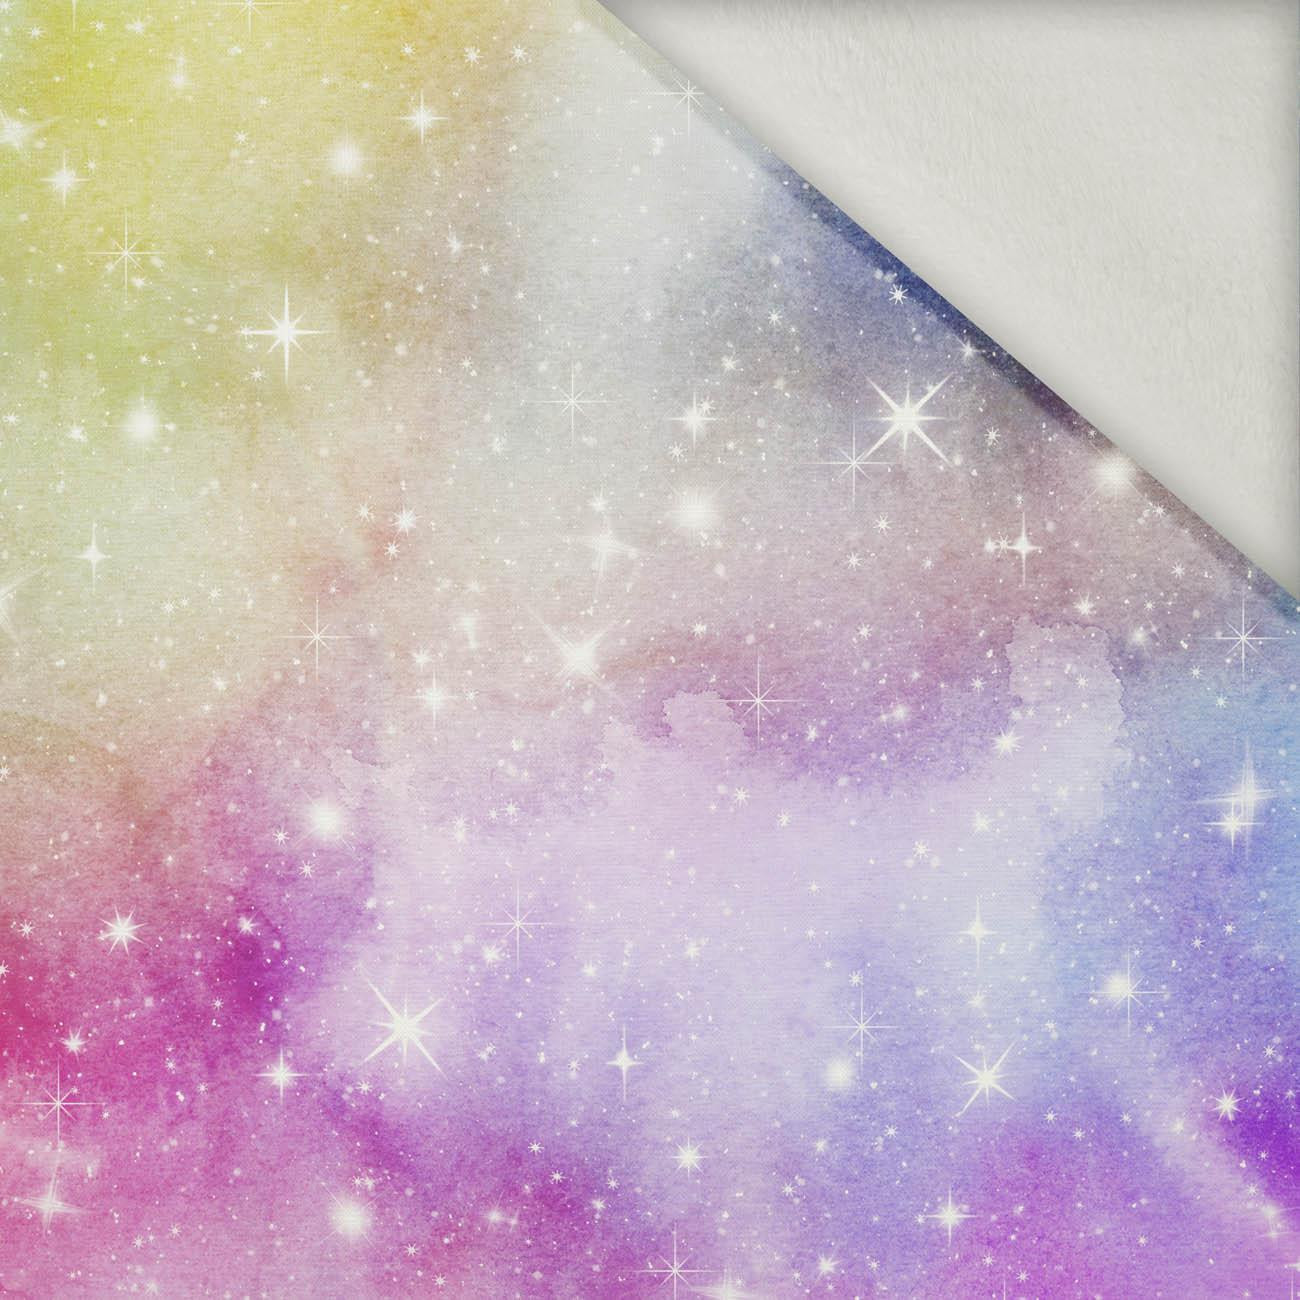 WATERCOLOR GALAXY PAT. 7 - brushed knit fabric with teddy / alpine fleece